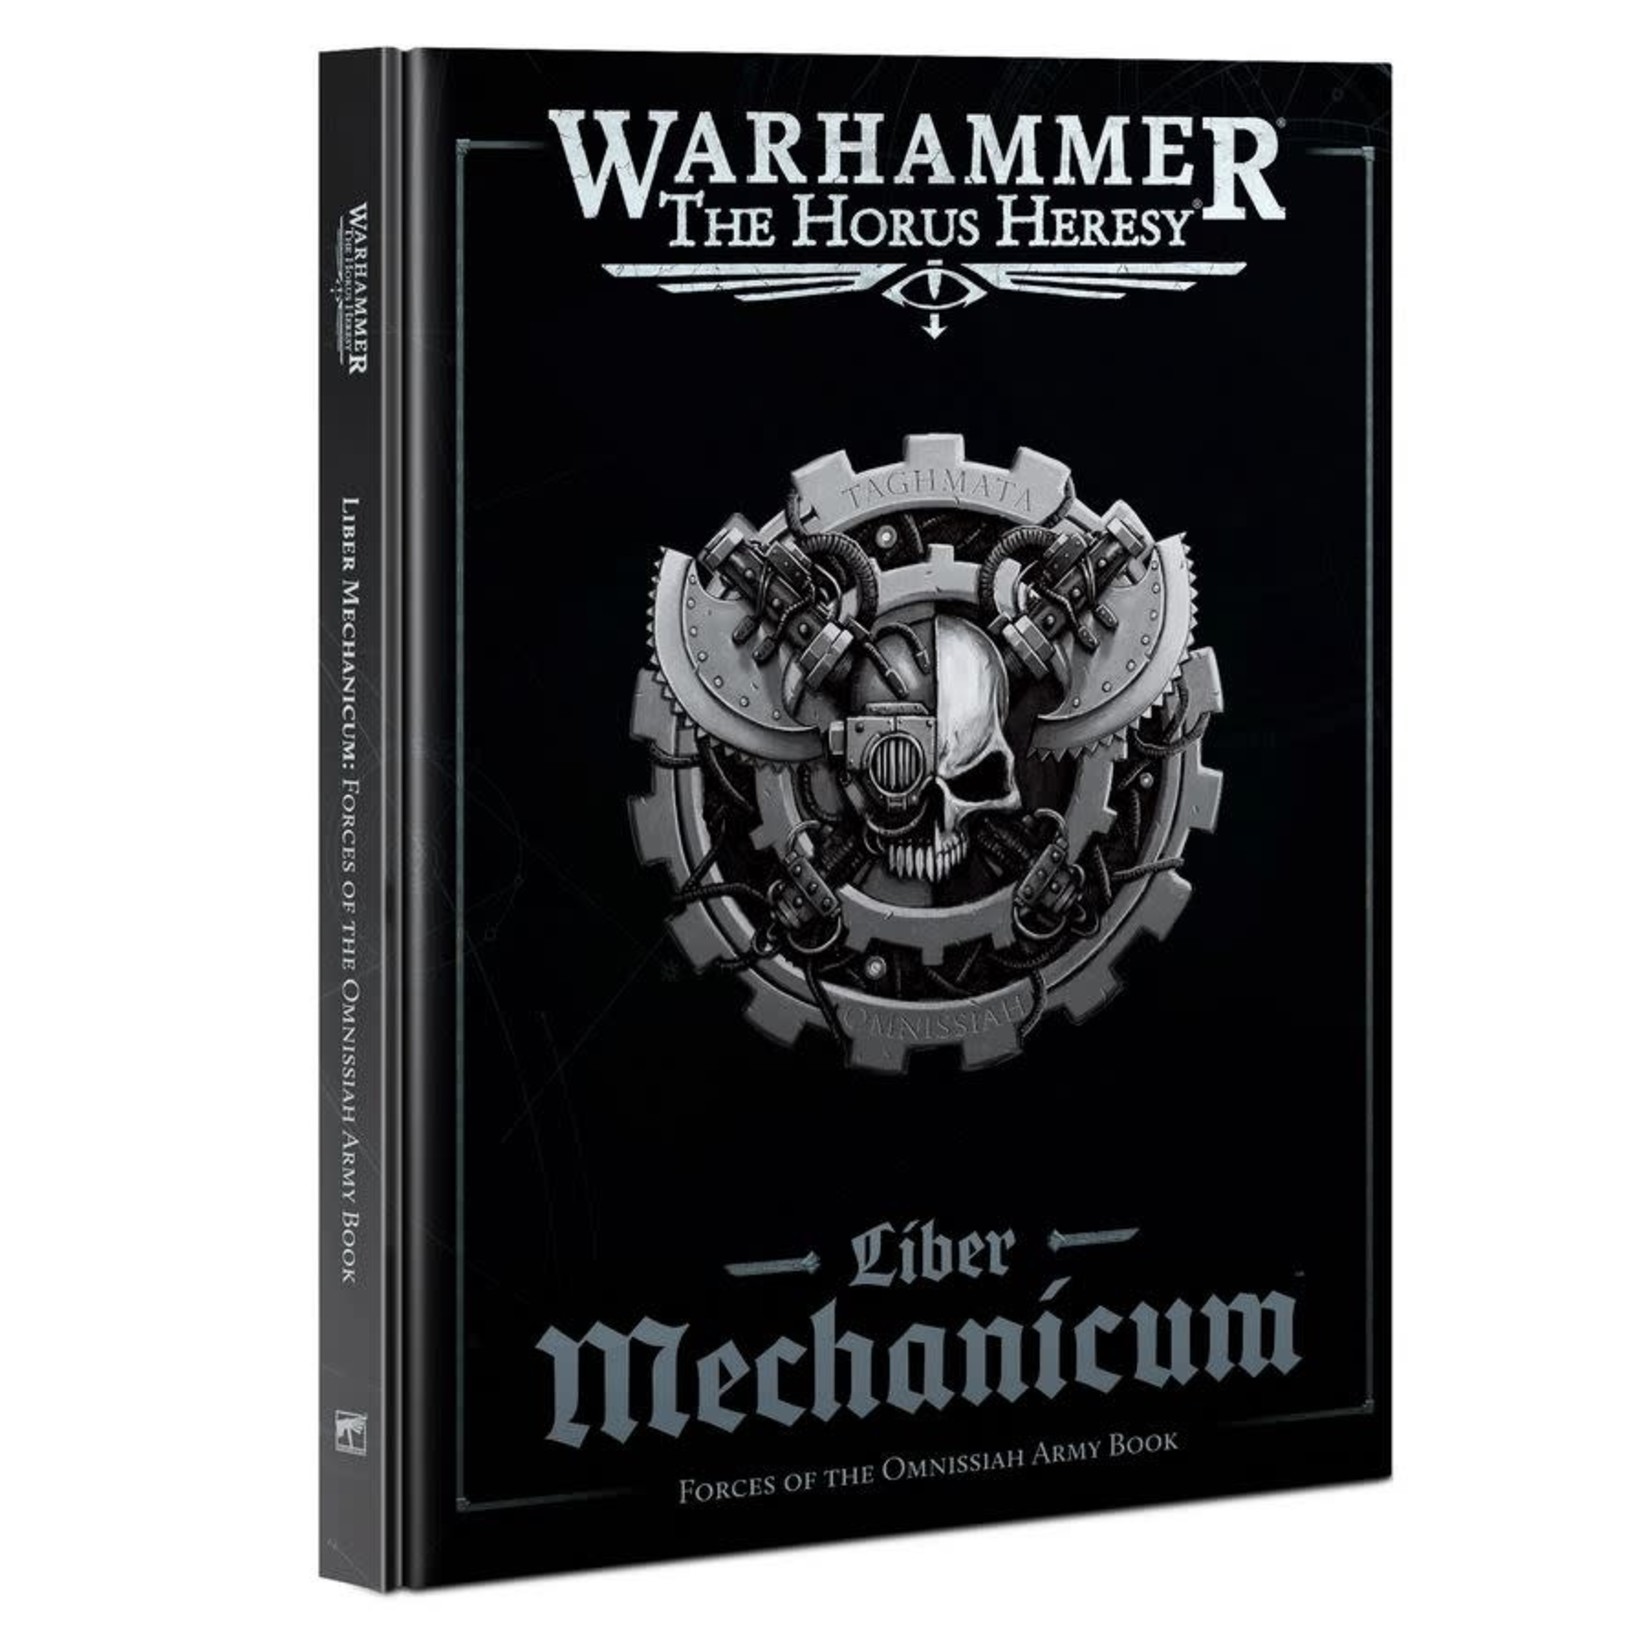 The Horus Heresy: Liber Mechanicum – Forces of the Omnissiah Army Book